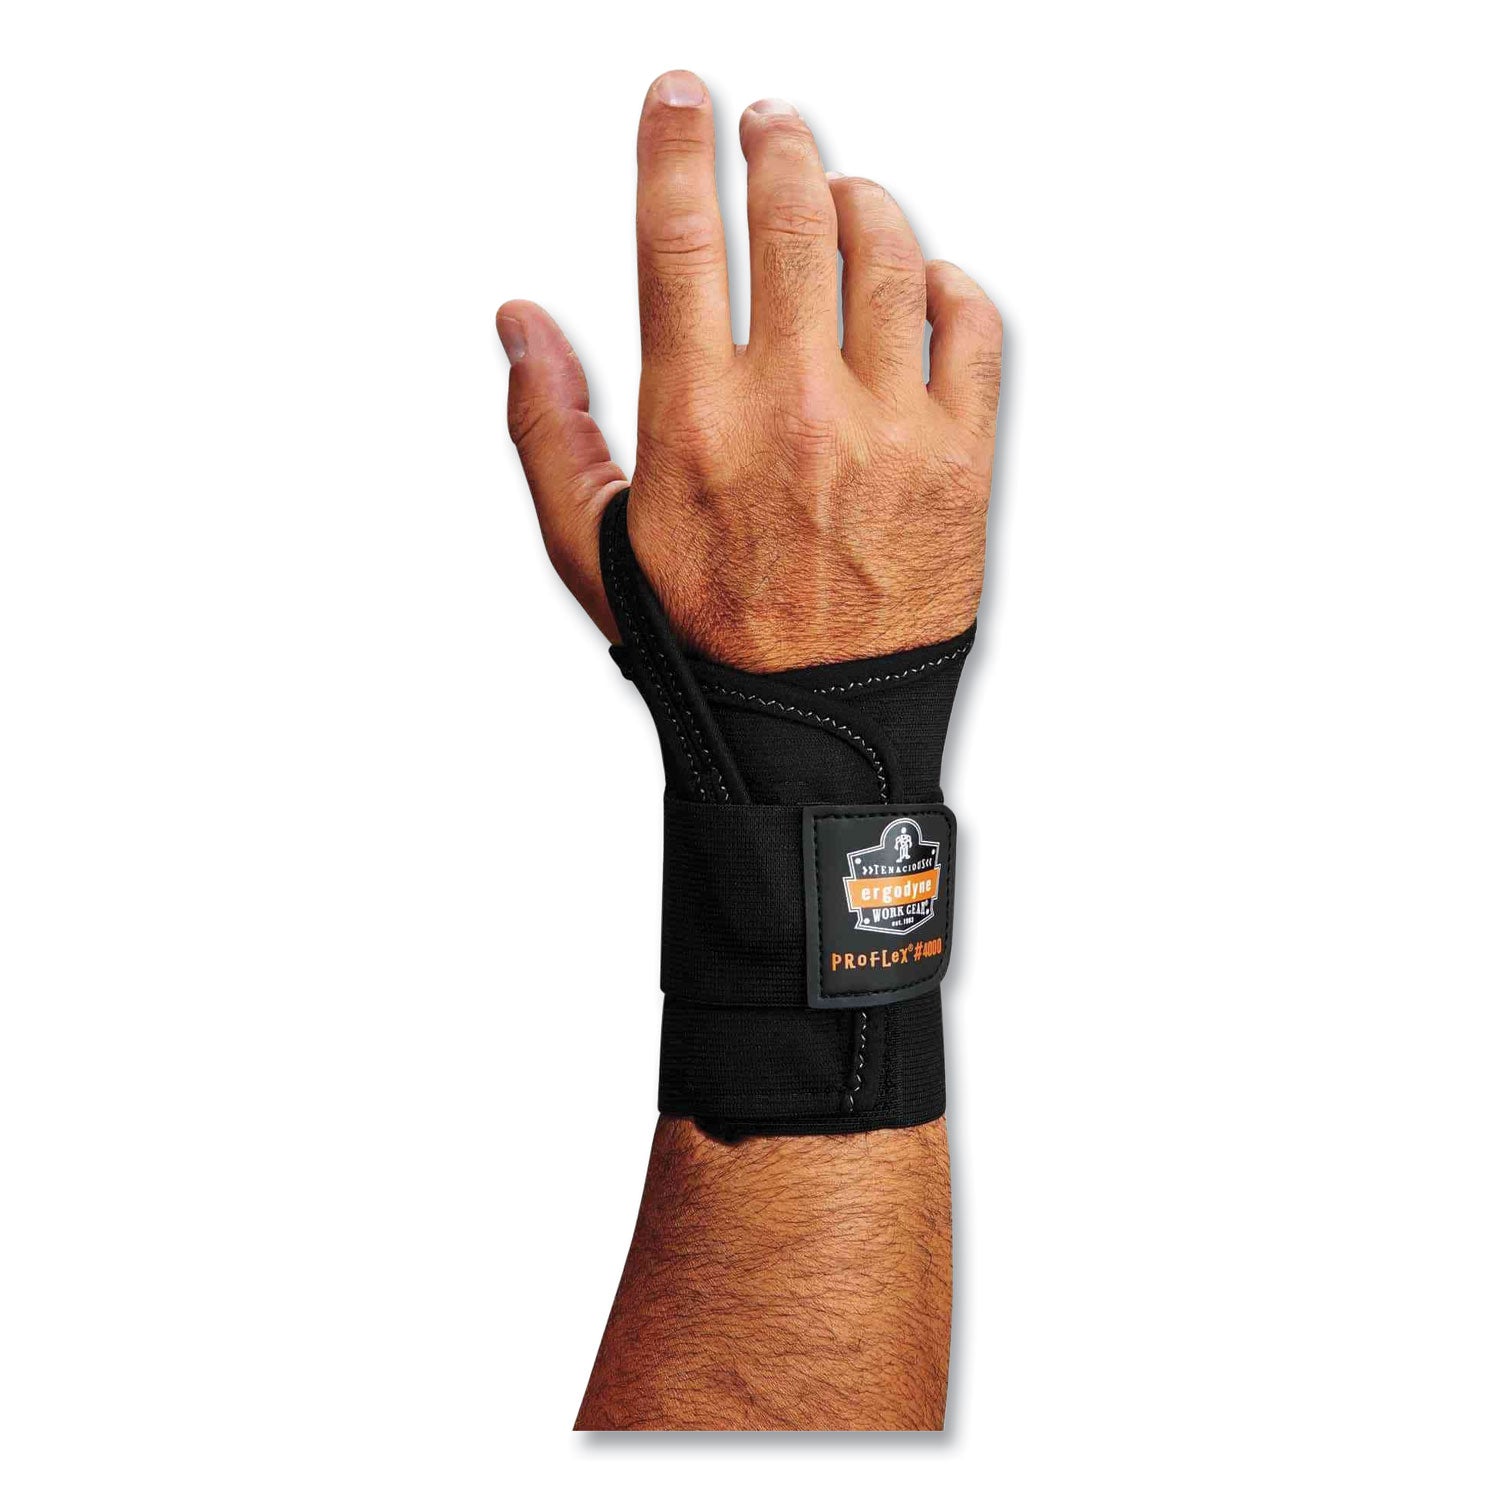 ProFlex 4000 Single Strap Wrist Support, Small, Fits Left Hand, Black, Ships in 1-3 Business Days - 